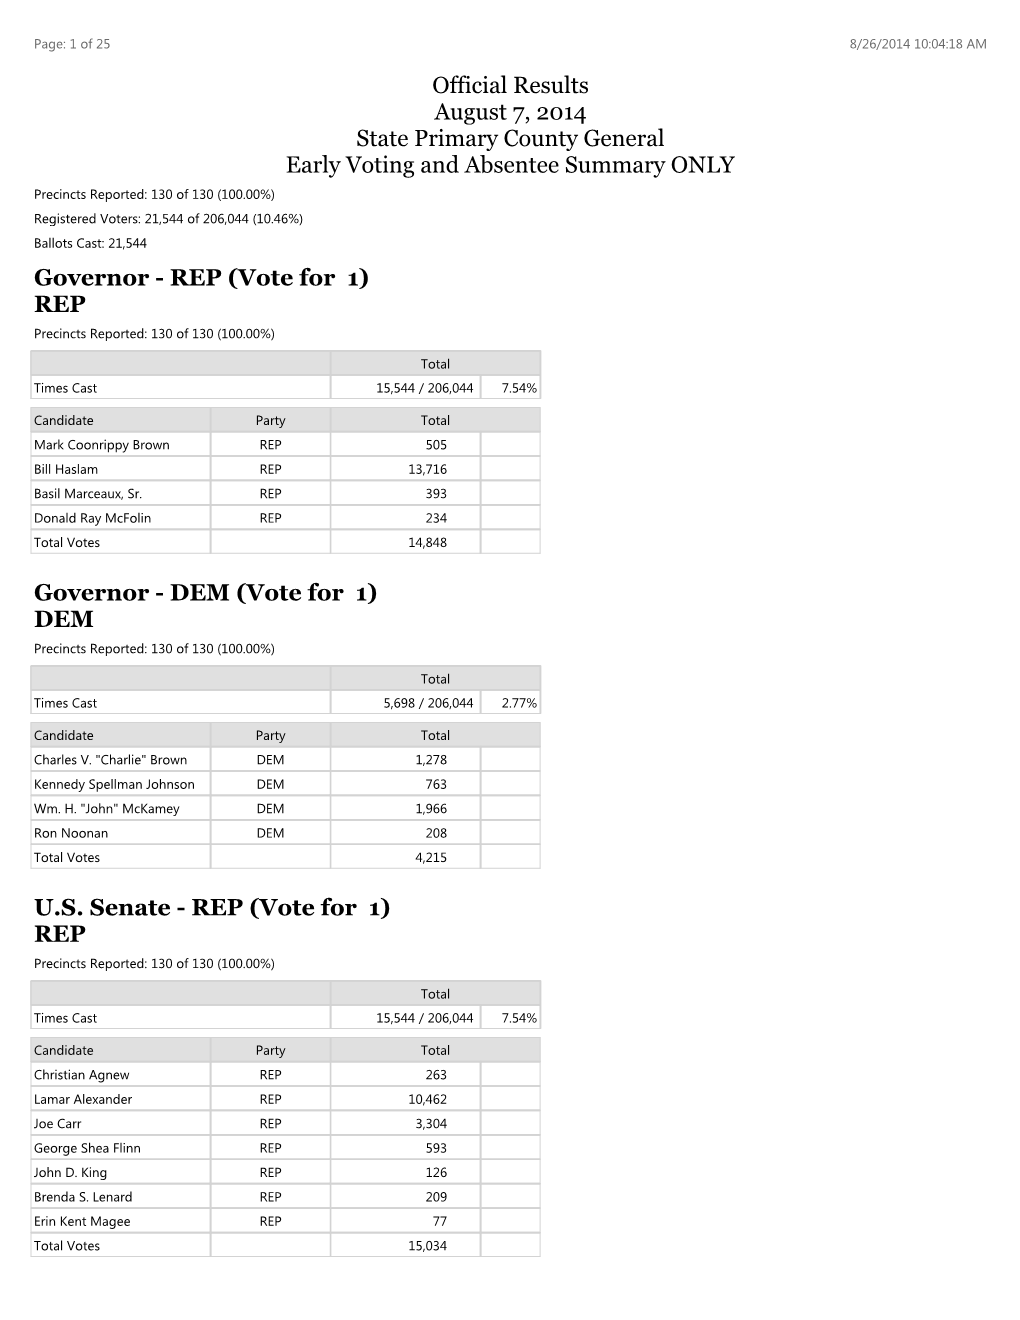 Official Results August 7, 2014 Early Voting and Absentee ONLY